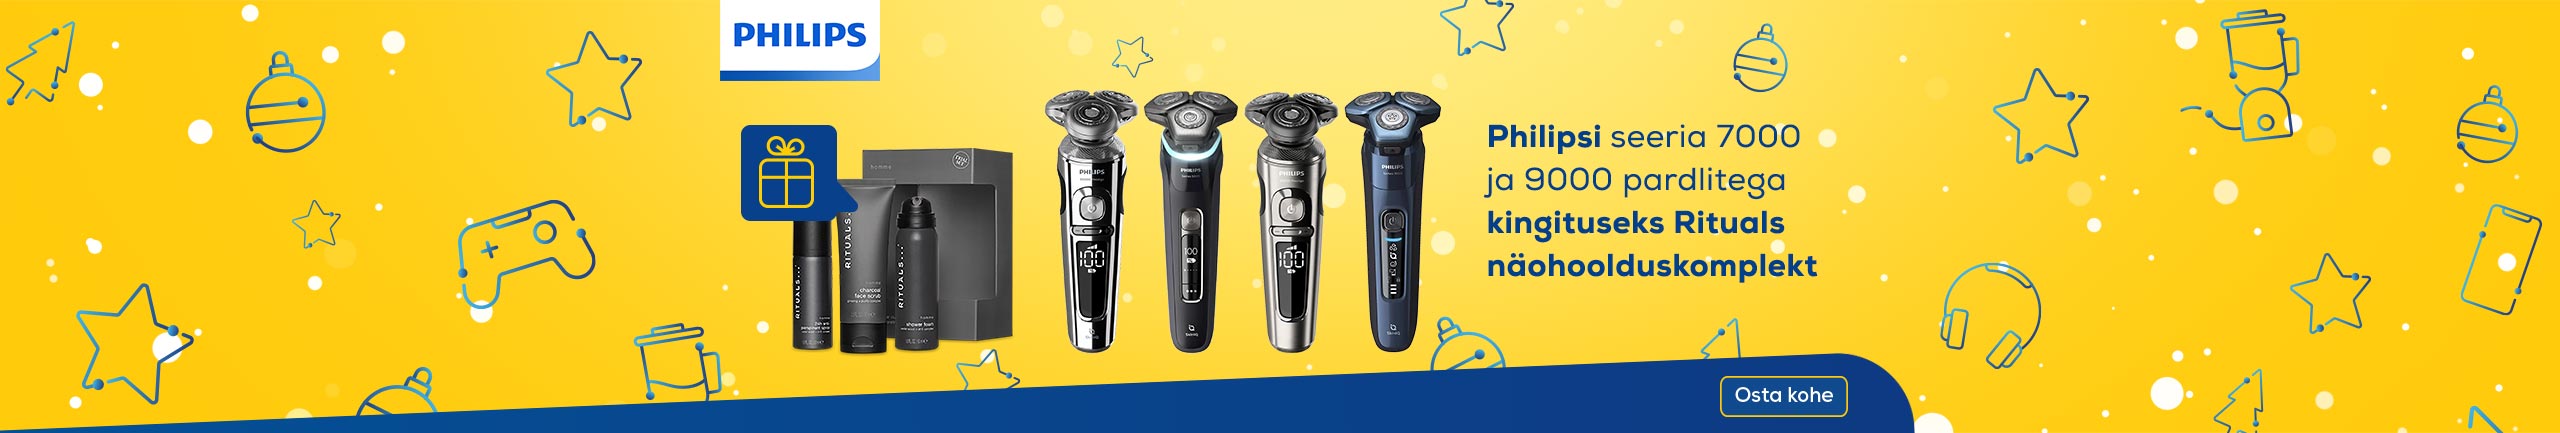 Buy selected Philips shaver and receive a complimentary gift!